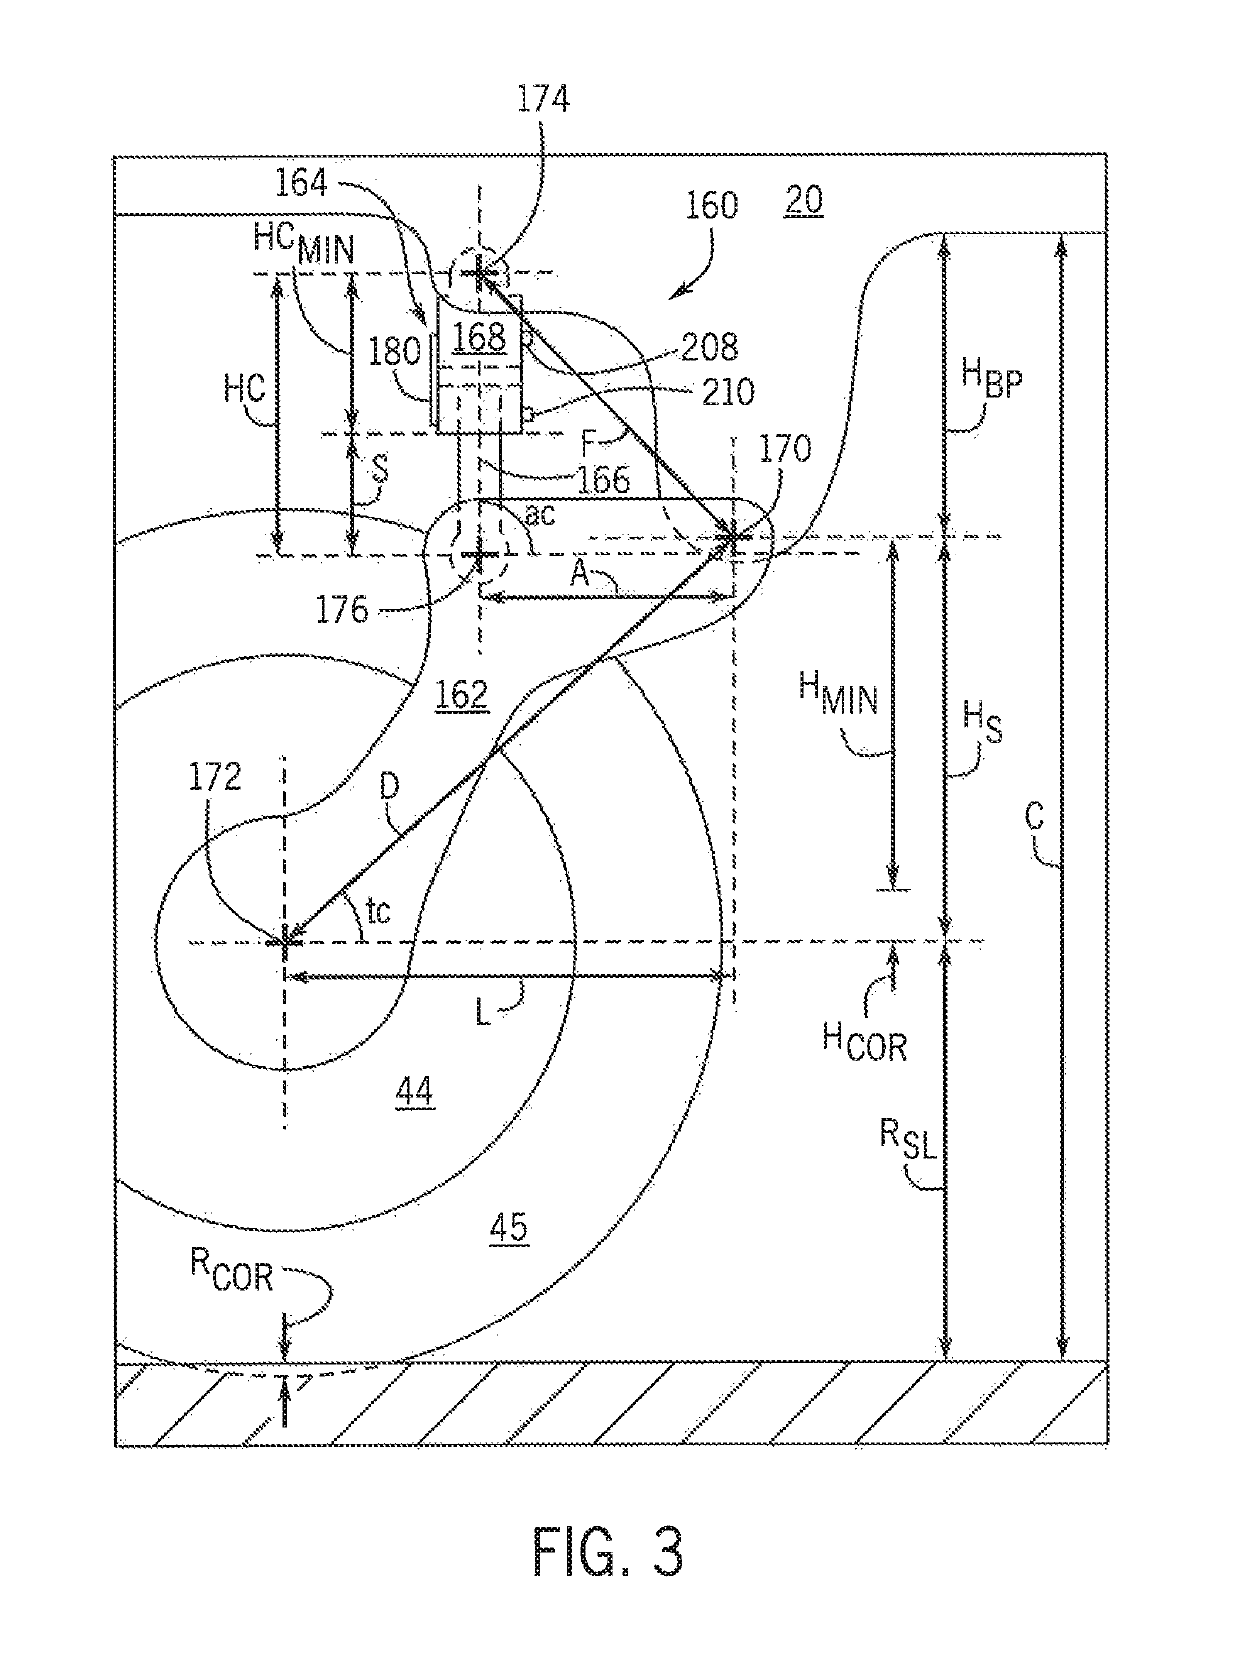 Suspension control system providing closed loop control of hydraulic fluid volumes for an agricultural machine